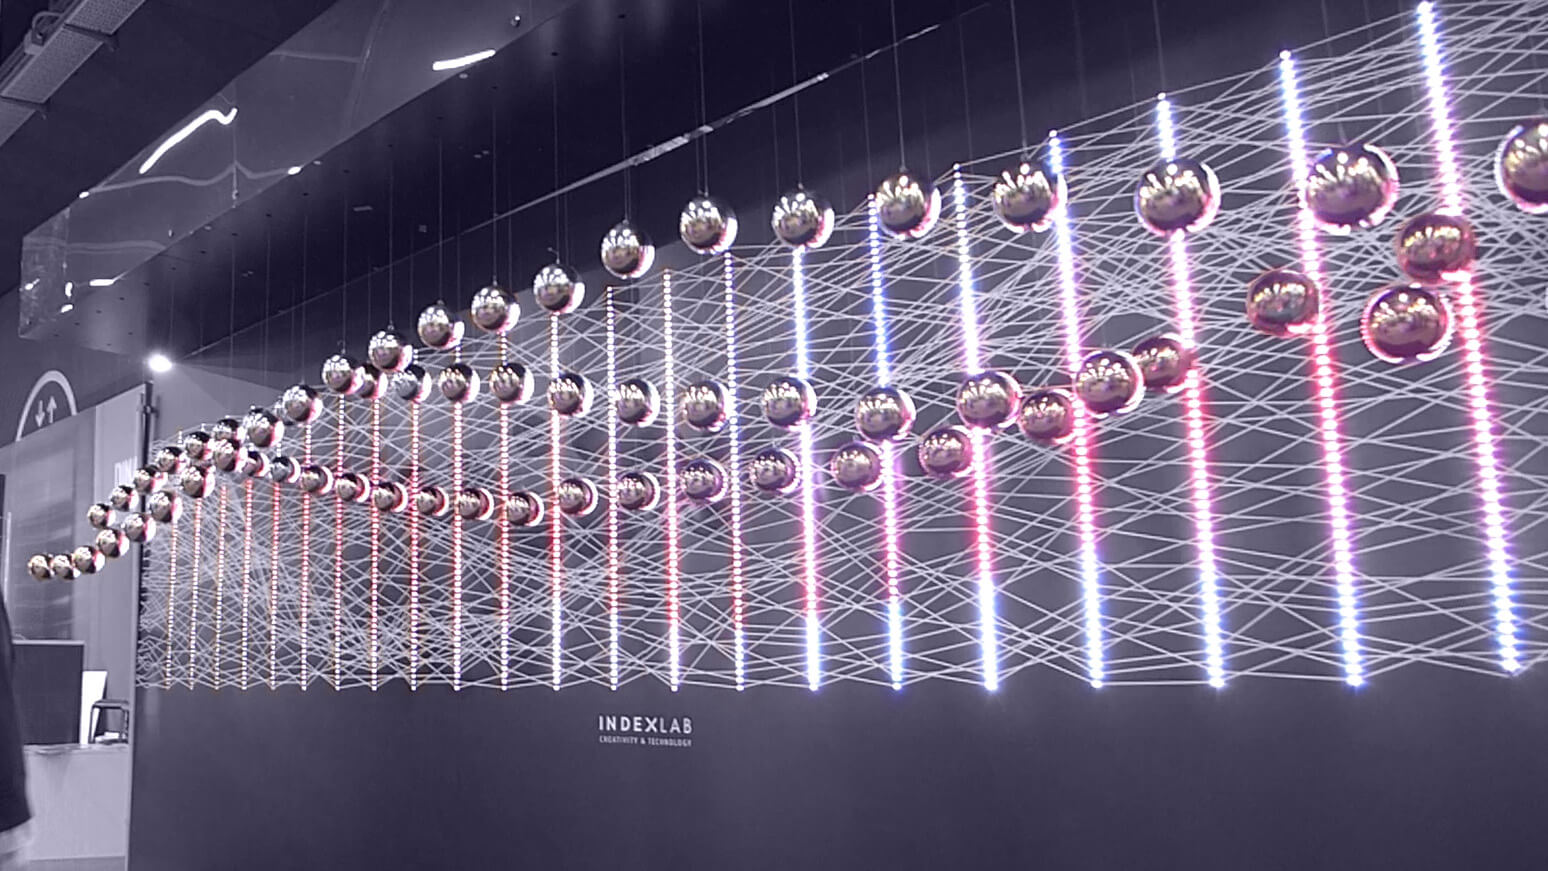 The flying Dots installation featuring suspended moving spheres on a dynamically lit background